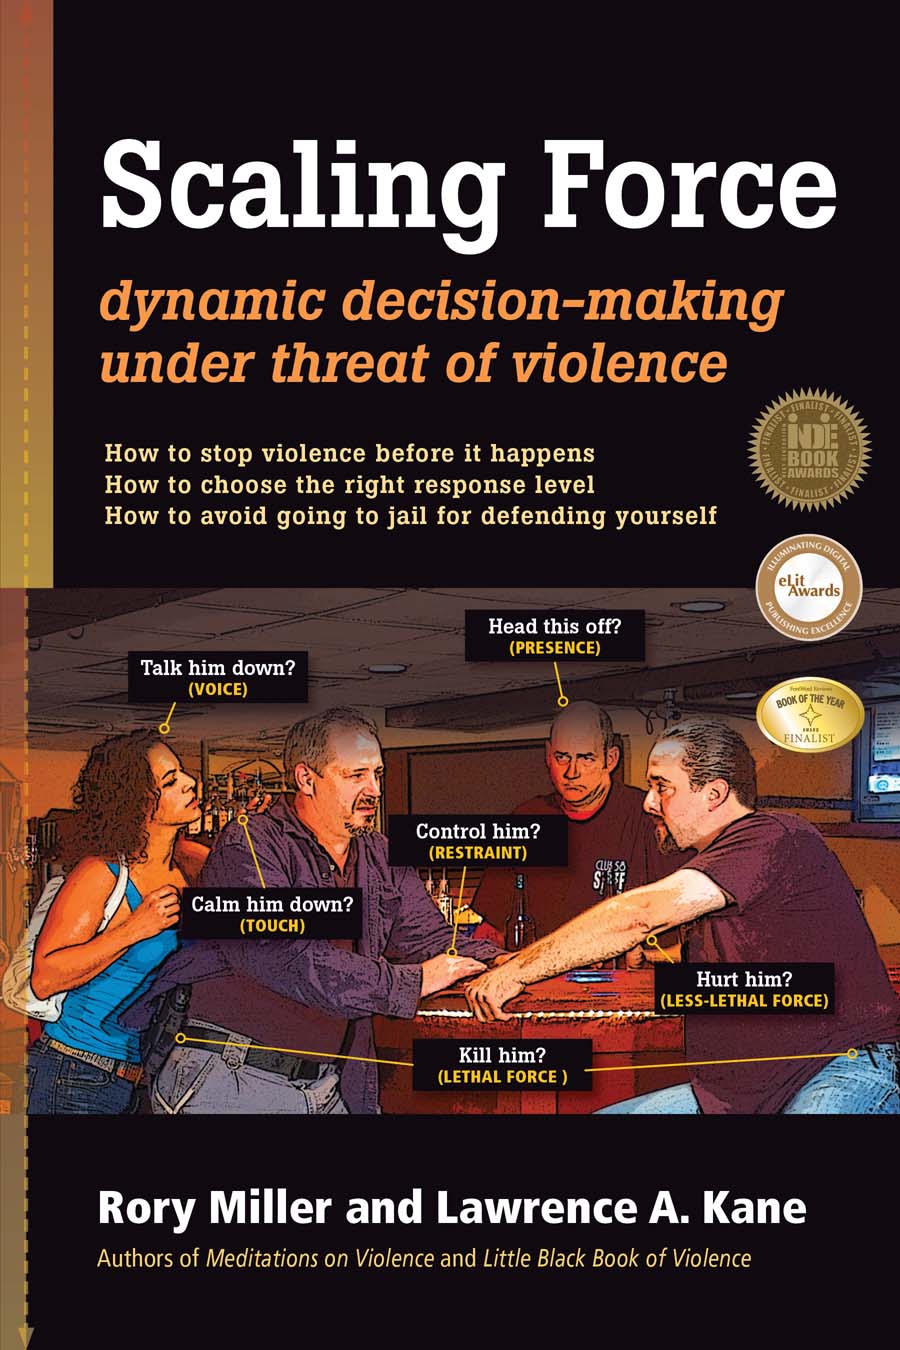 Scaling Force—Dynamic Decision Making Under Threat of Violence Book by Rory Miller